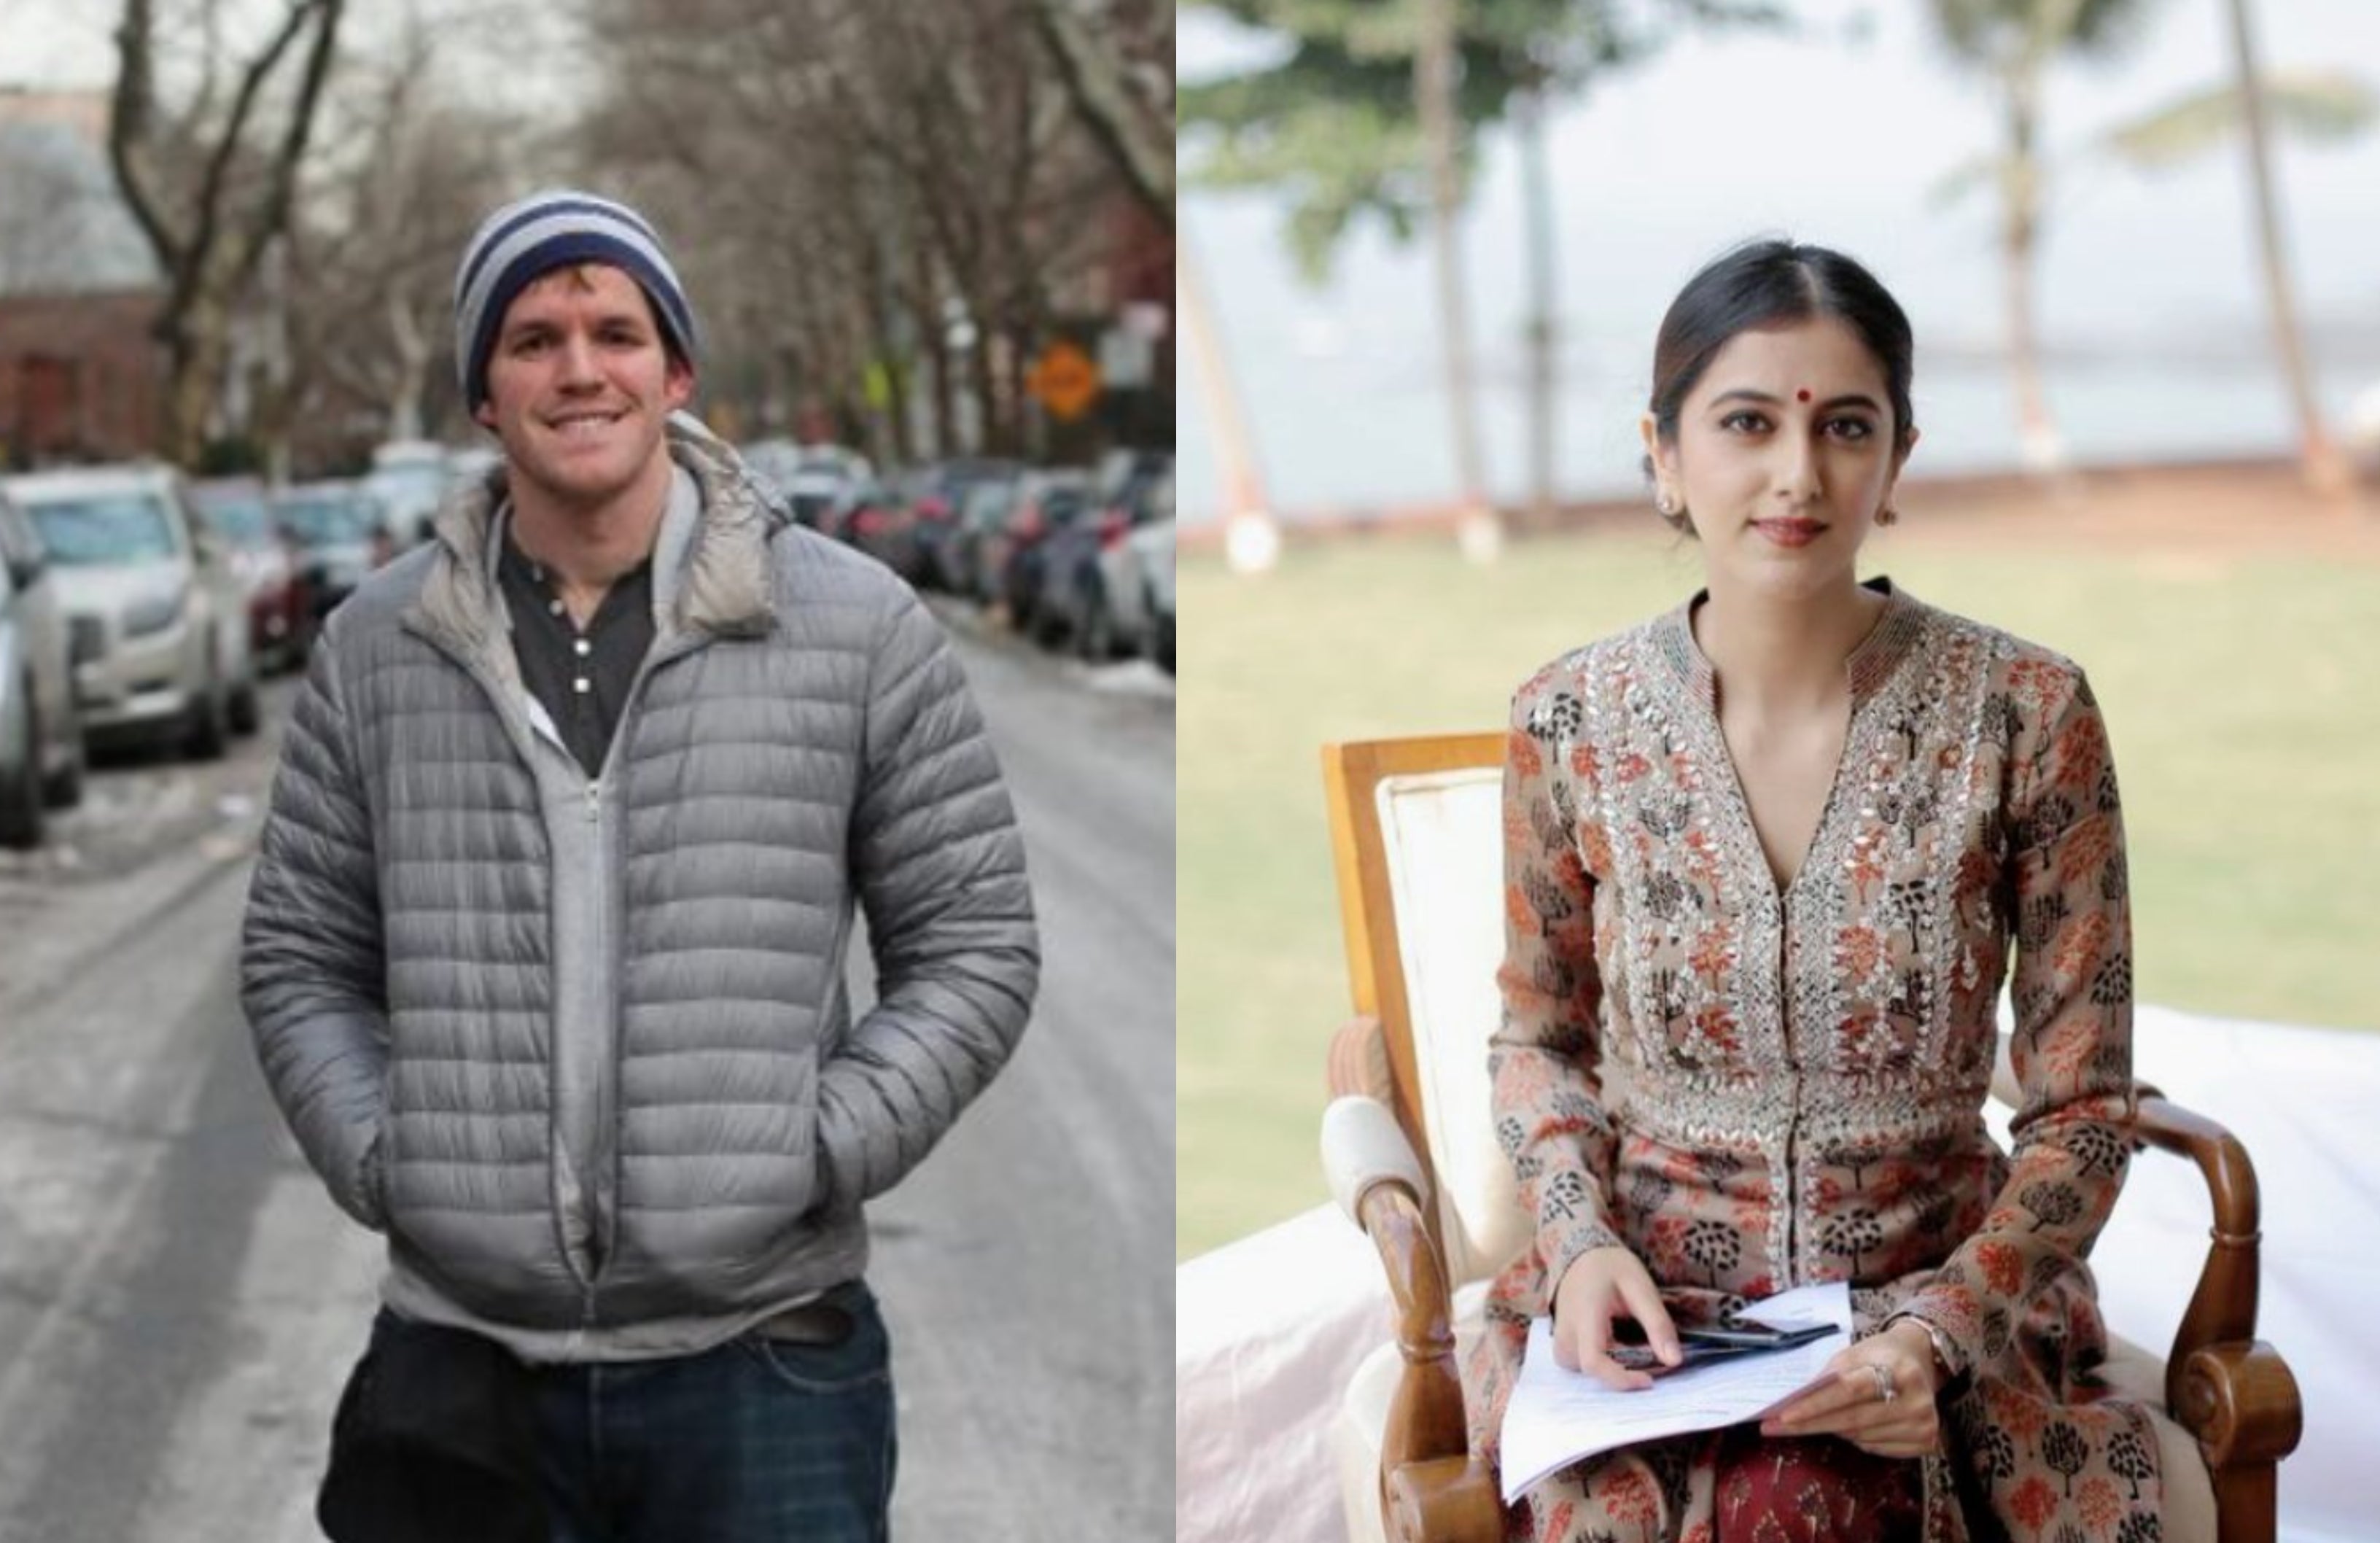 Karishma Mehta, the founder of Humans of Bombay, was called out by Brandon Stanton, the founder of Humans of New York